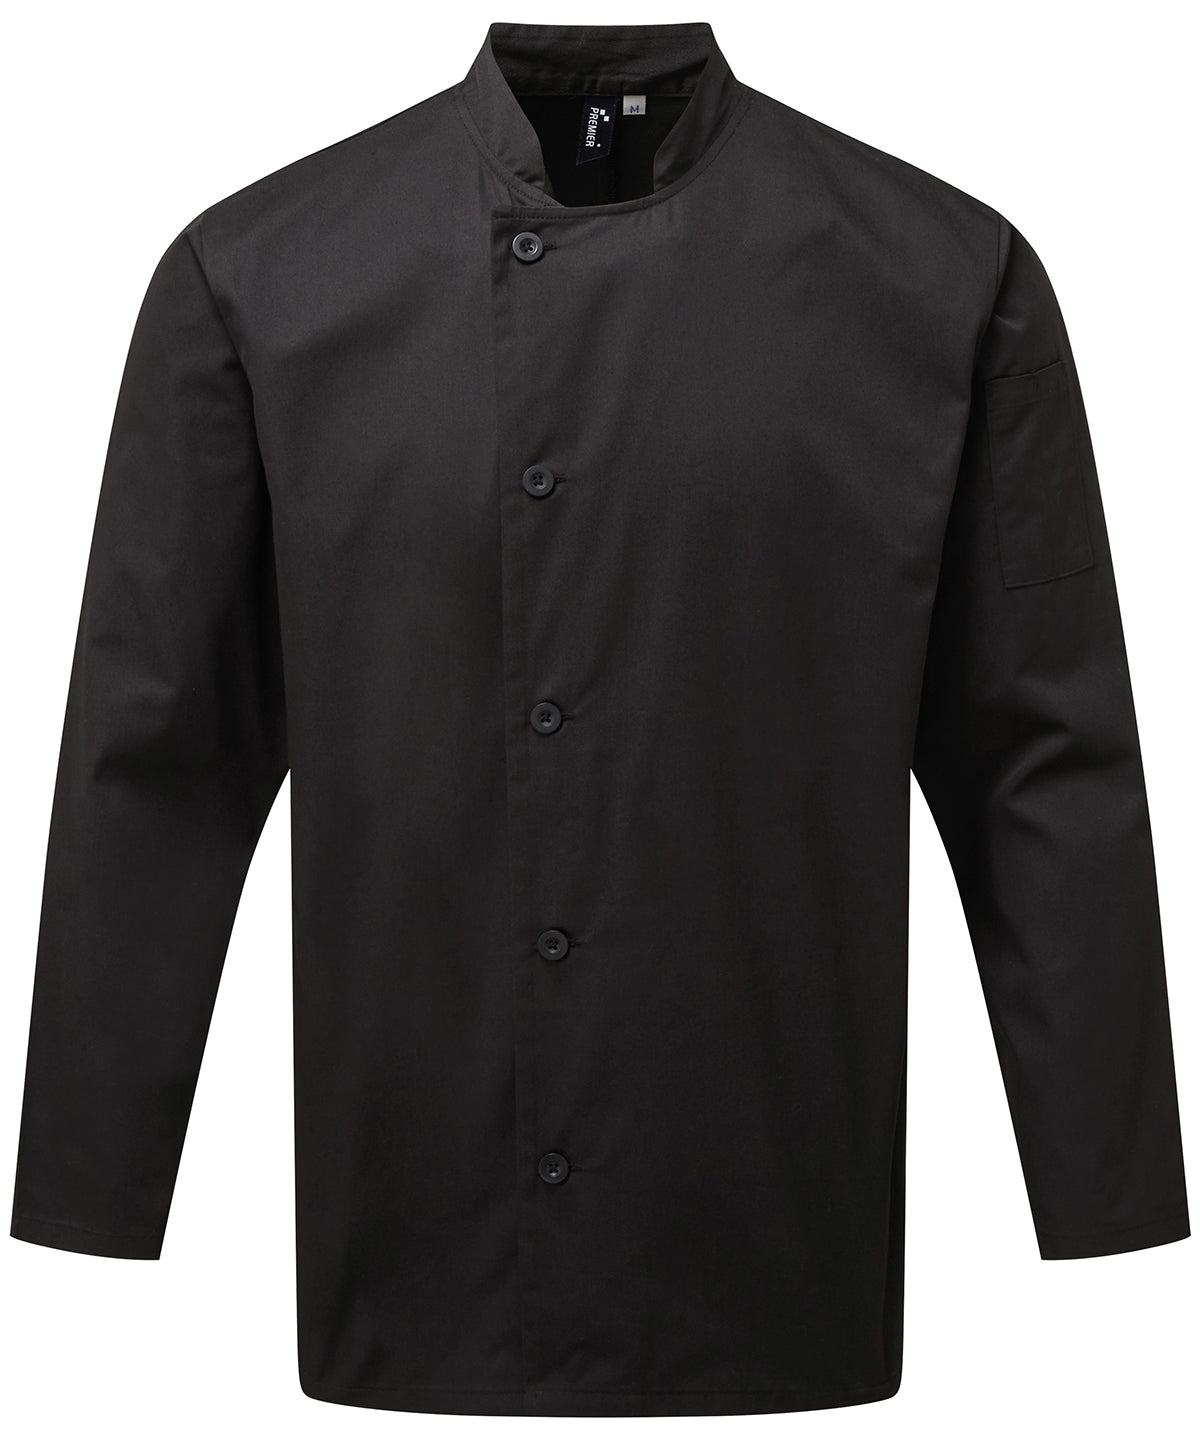 Chef's Essential Long Sleeve Jacket